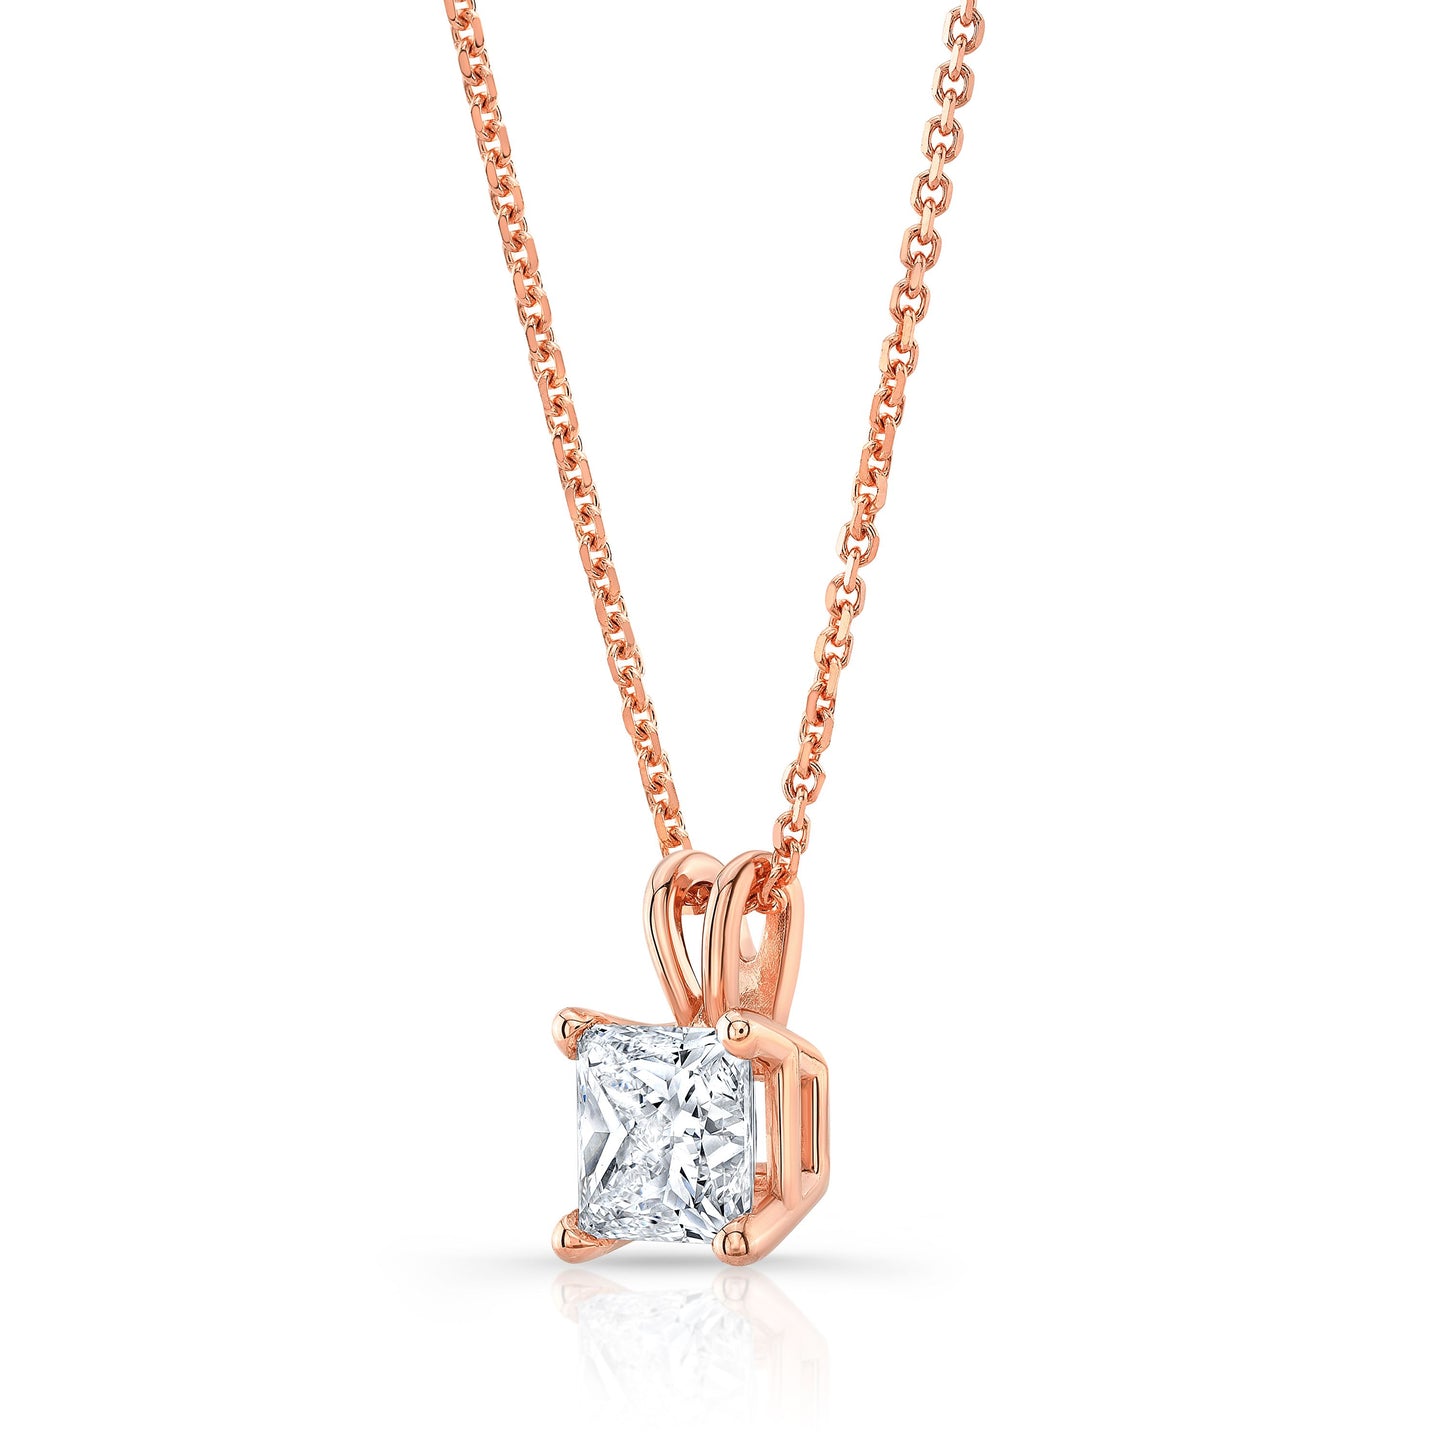 Princess Diamond Solitaire Pendant In A 14k Rose Gold 4-prong Basket Setting, 0.75ct. T.w. (hi, Si1-si2)